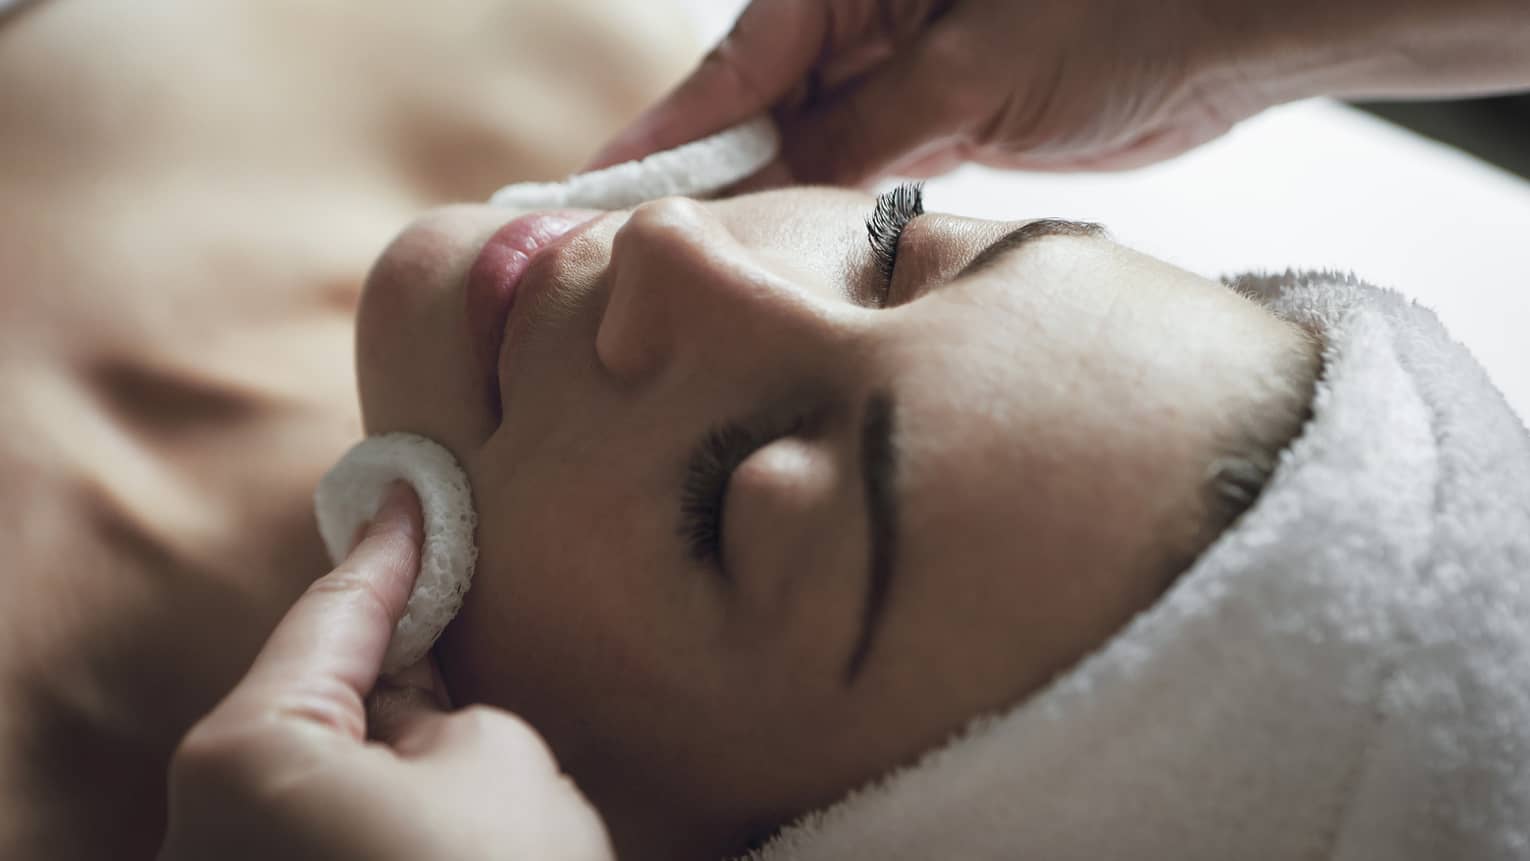 A detail of hands rubbing a sponge on a woman's face as she lies on a massage table with her eyes closed and hair wrapped up in a white towel